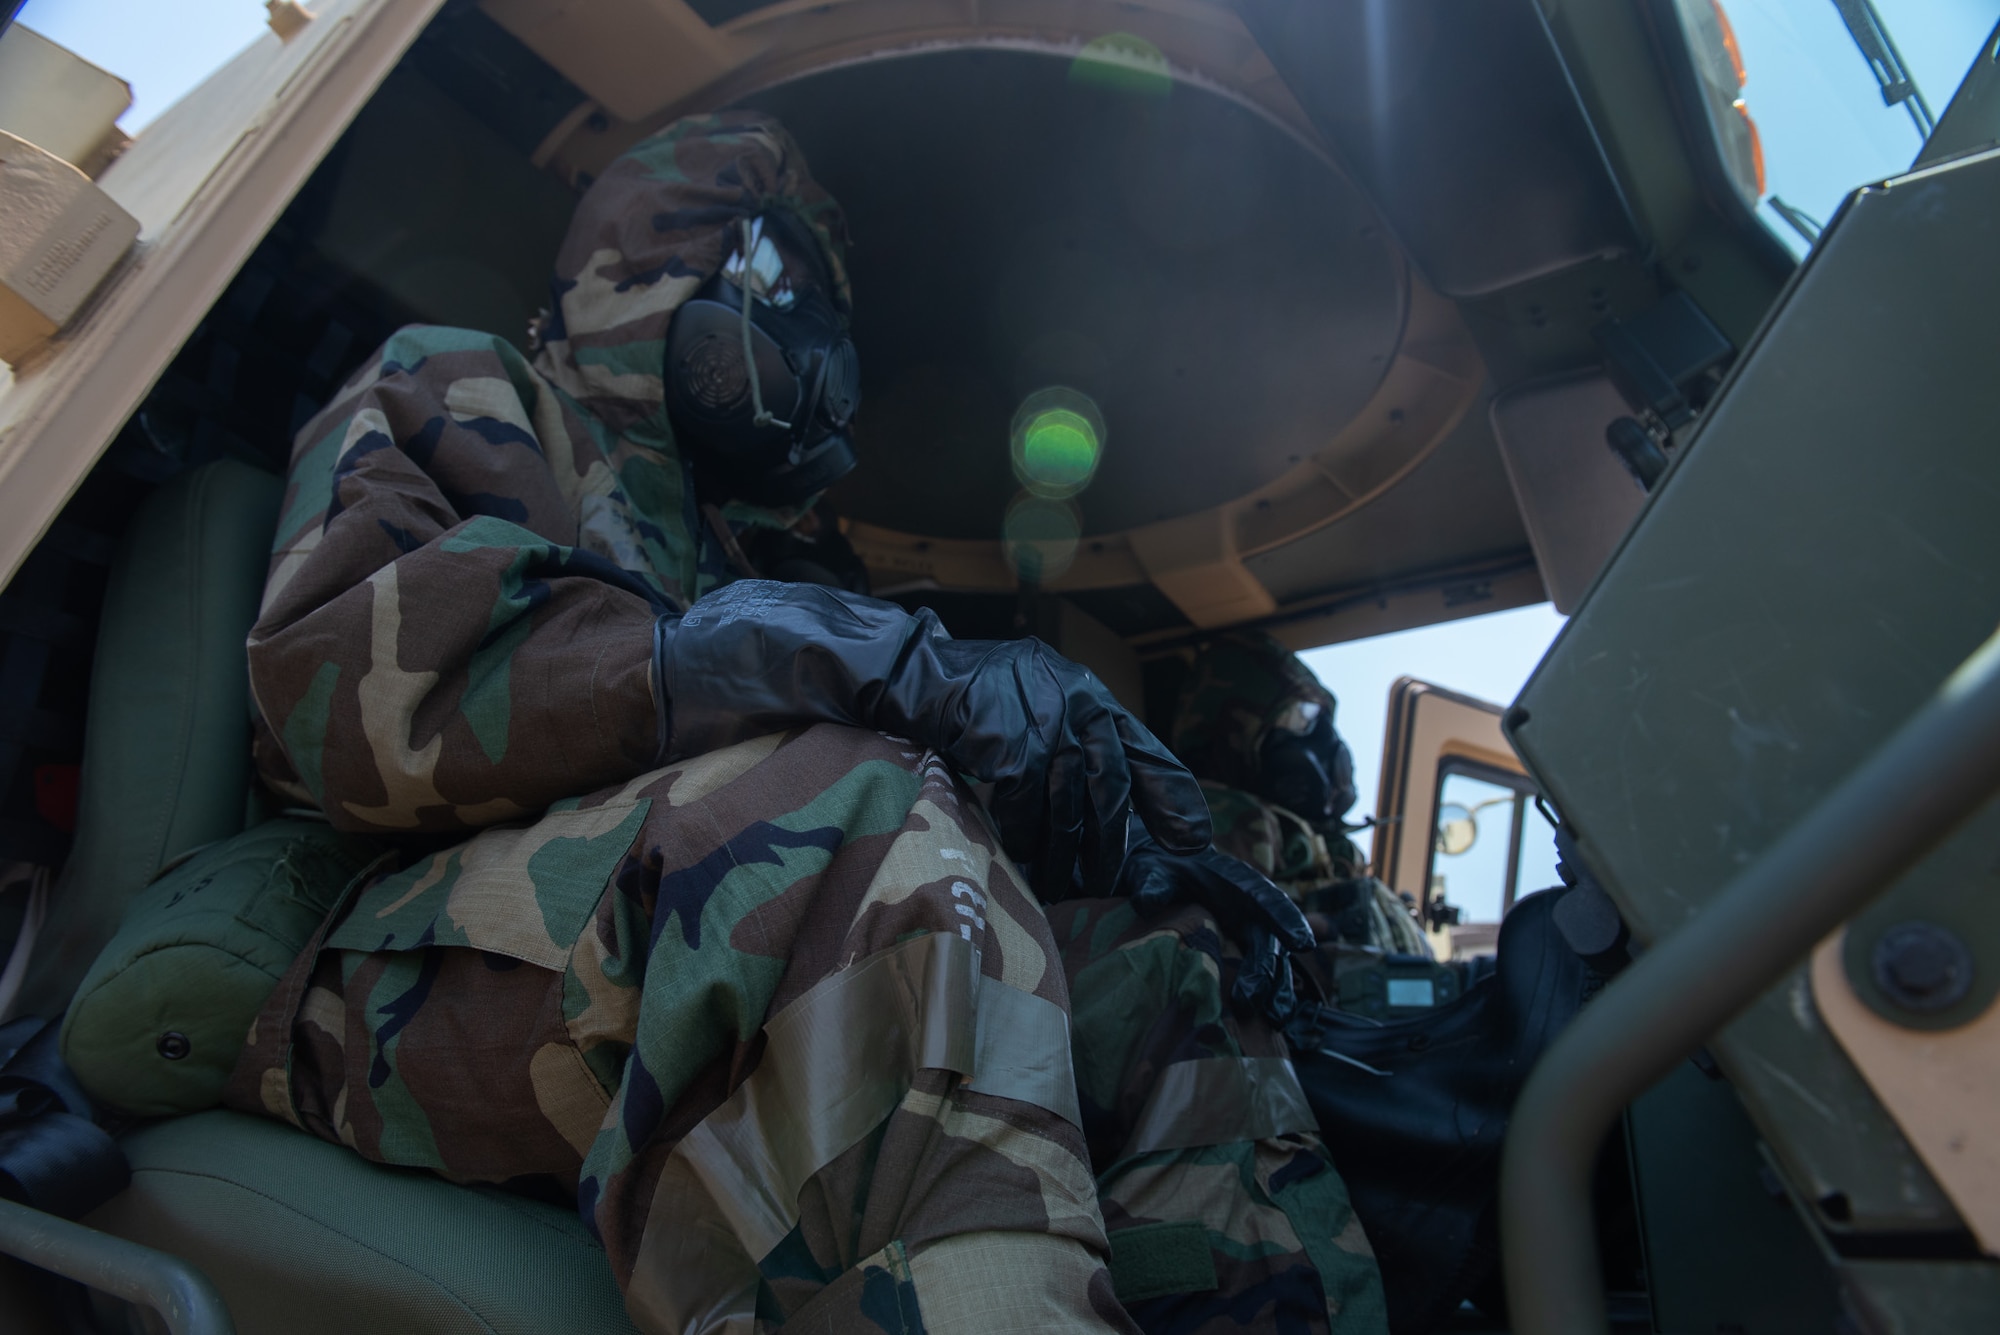 U.S. Air Force 55th Combat Communications Squadron Airmen test their Mission Oriented Protective Posture (MOPP) gear while operating a Light Medium Tactical Vehicle (LMTV), June 21, 2023, at Tinker Air Force Base, Oklahoma. Members train in MOPP gear in order to deploy to any environment and perform at-home operations, and Airmen tested many tasks throughout Exercise AGILE BLIZZARD UNIFIED VISION. (U.S. Air Force photo by 1st Lt. Hailey Malay)